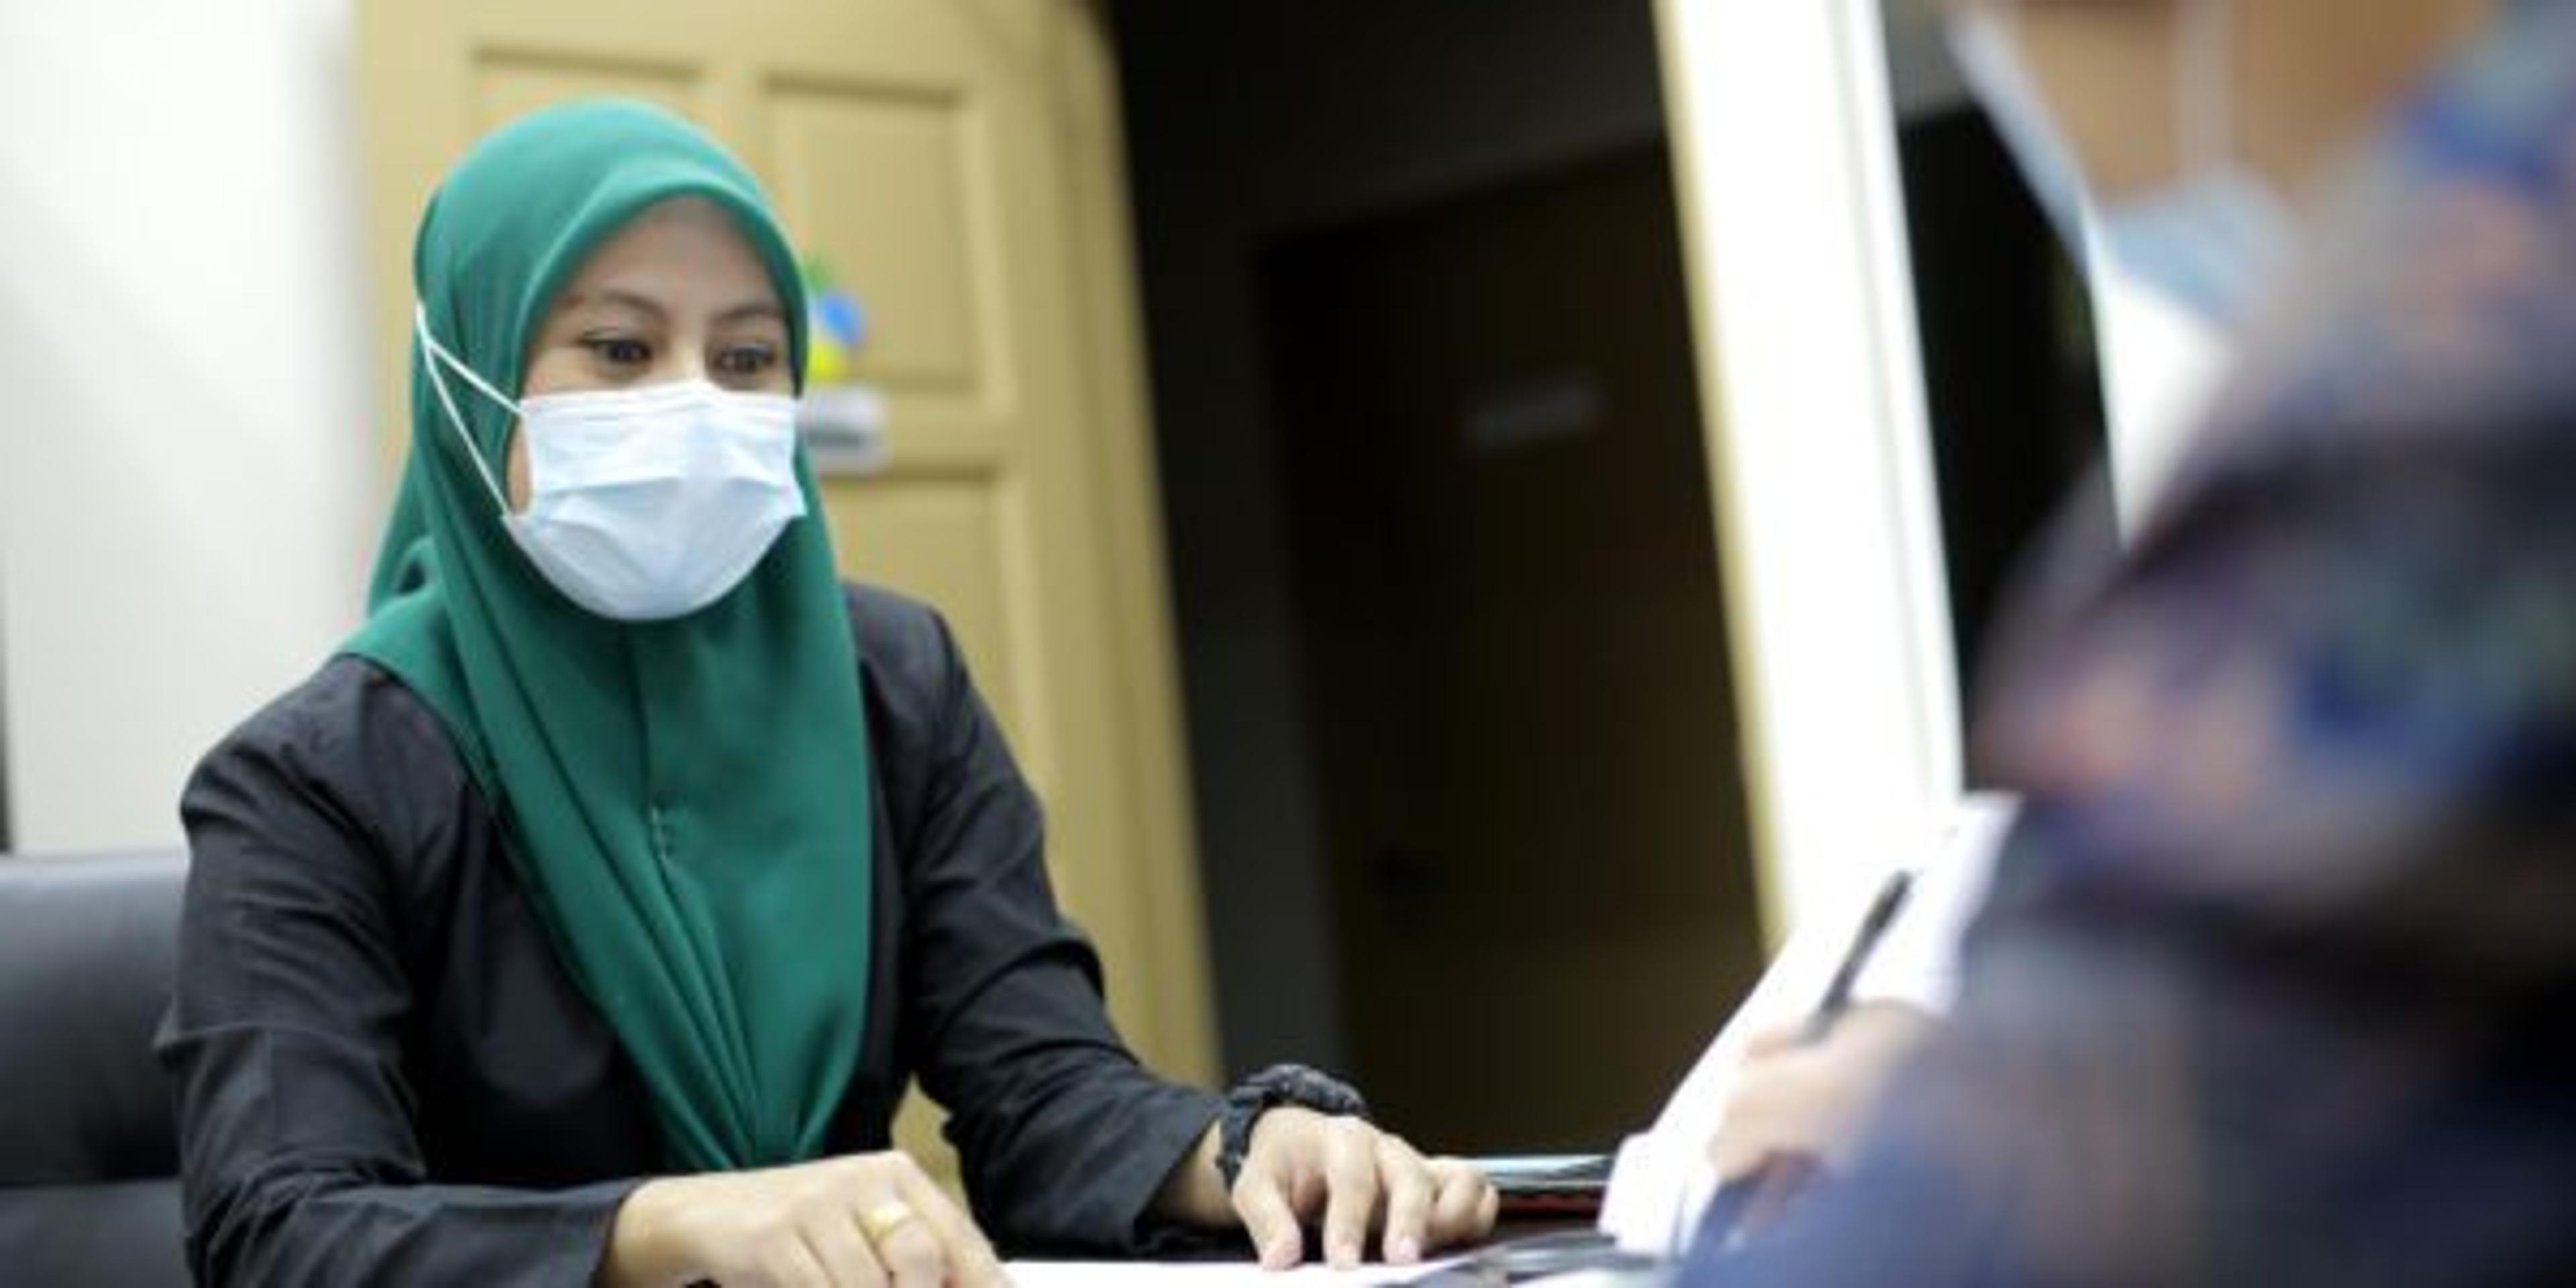 A Muslim female adult is selling insurance policy to Chinese lady in the office.